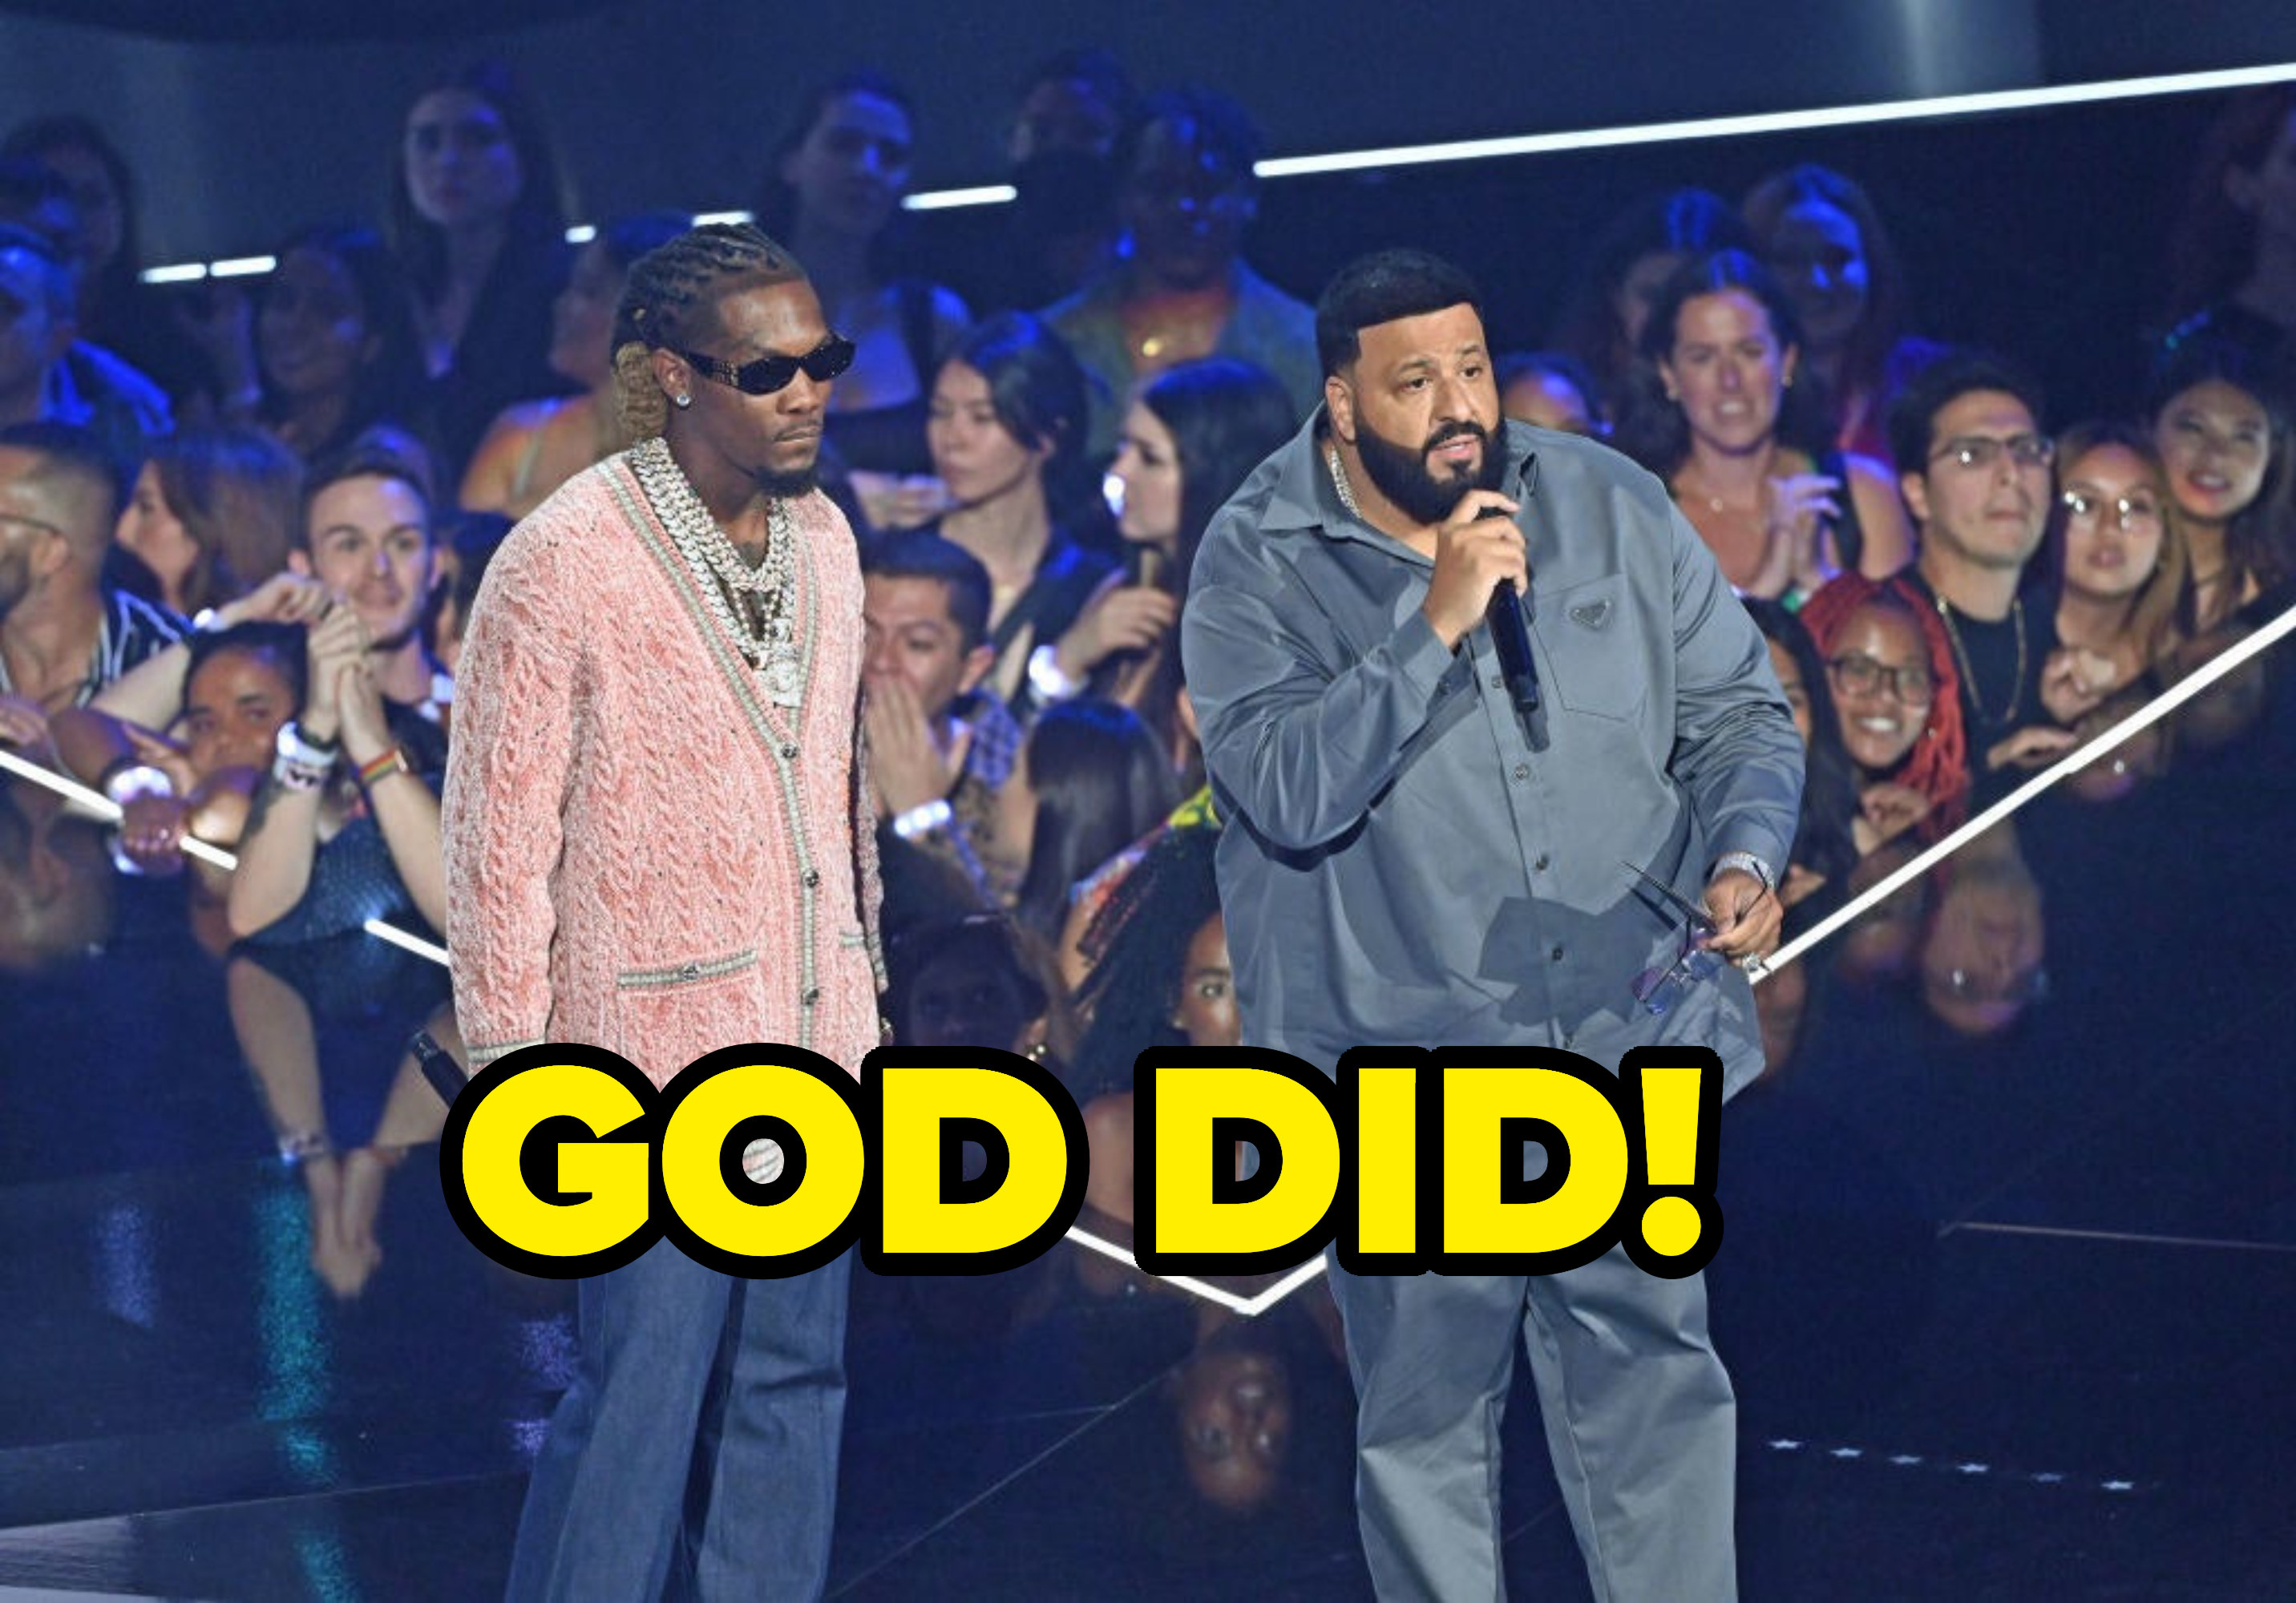 DJ Khaled with Offset holding a microphone with the caption &quot;God Did!&quot;